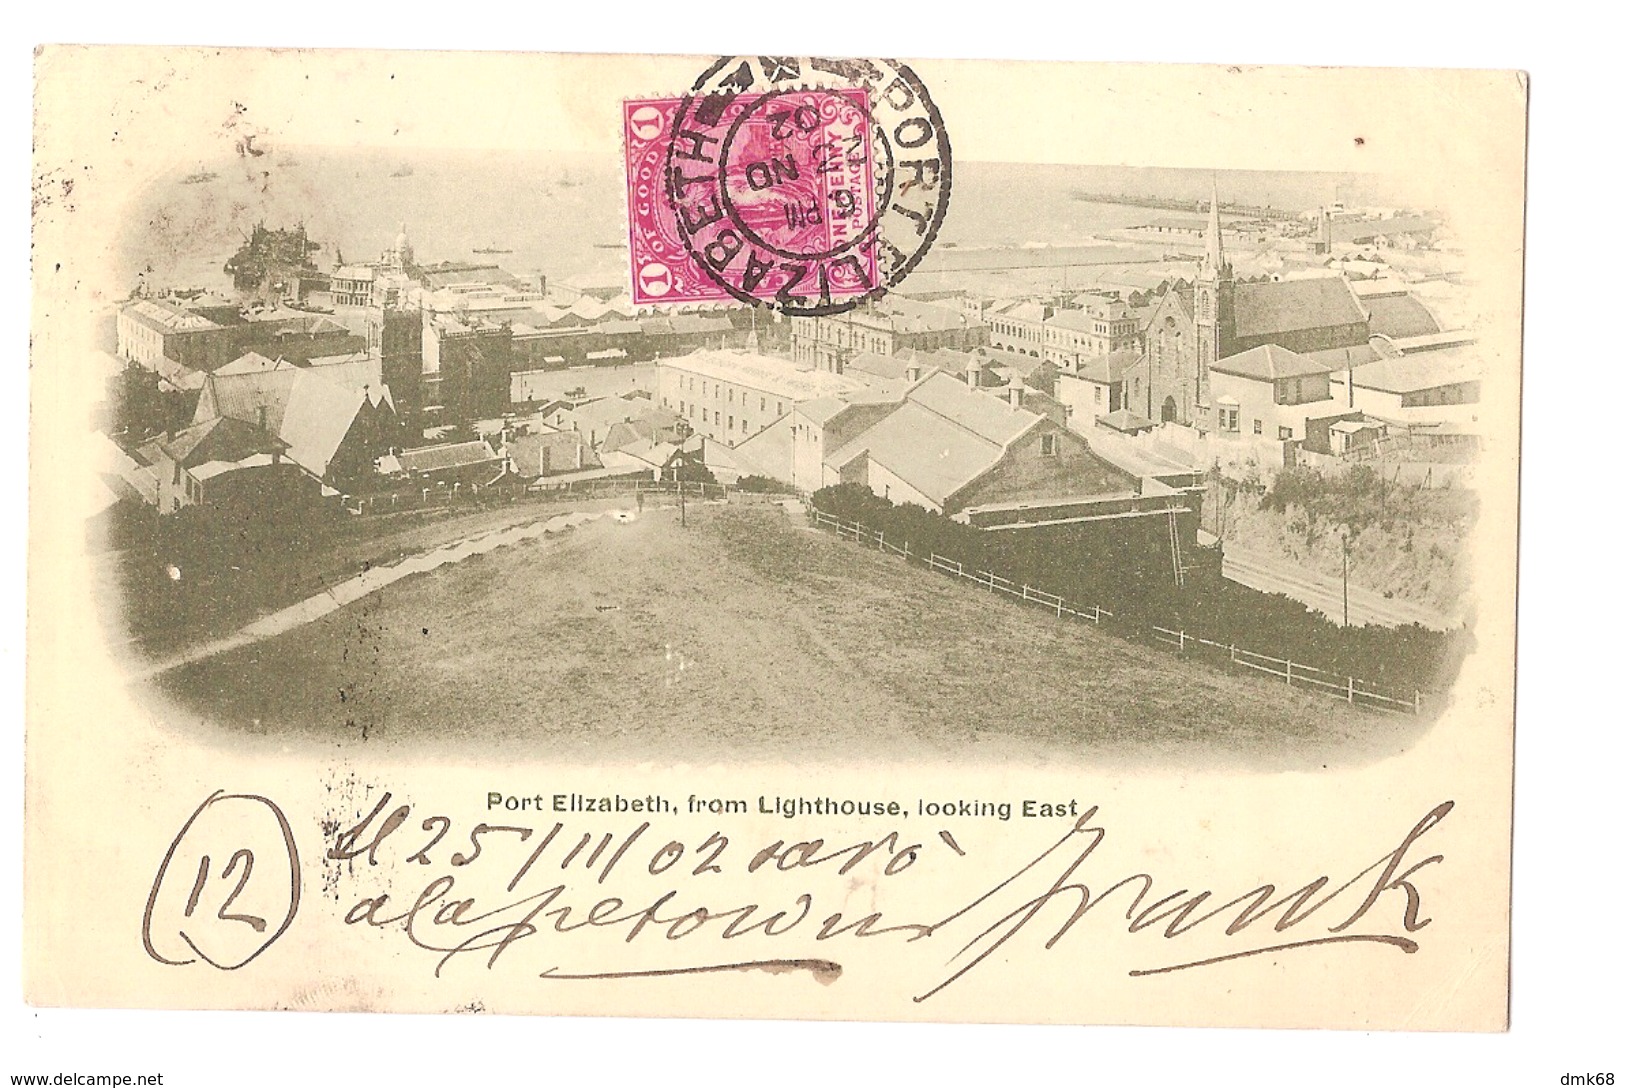 SOUTH AFRICA - PORT ELIZABETH - FROM LIGHTHOUSE LOOKING EAST - STAMP - MAILED TO ITALY 1902 ( 2774 ) - Afrique Du Sud